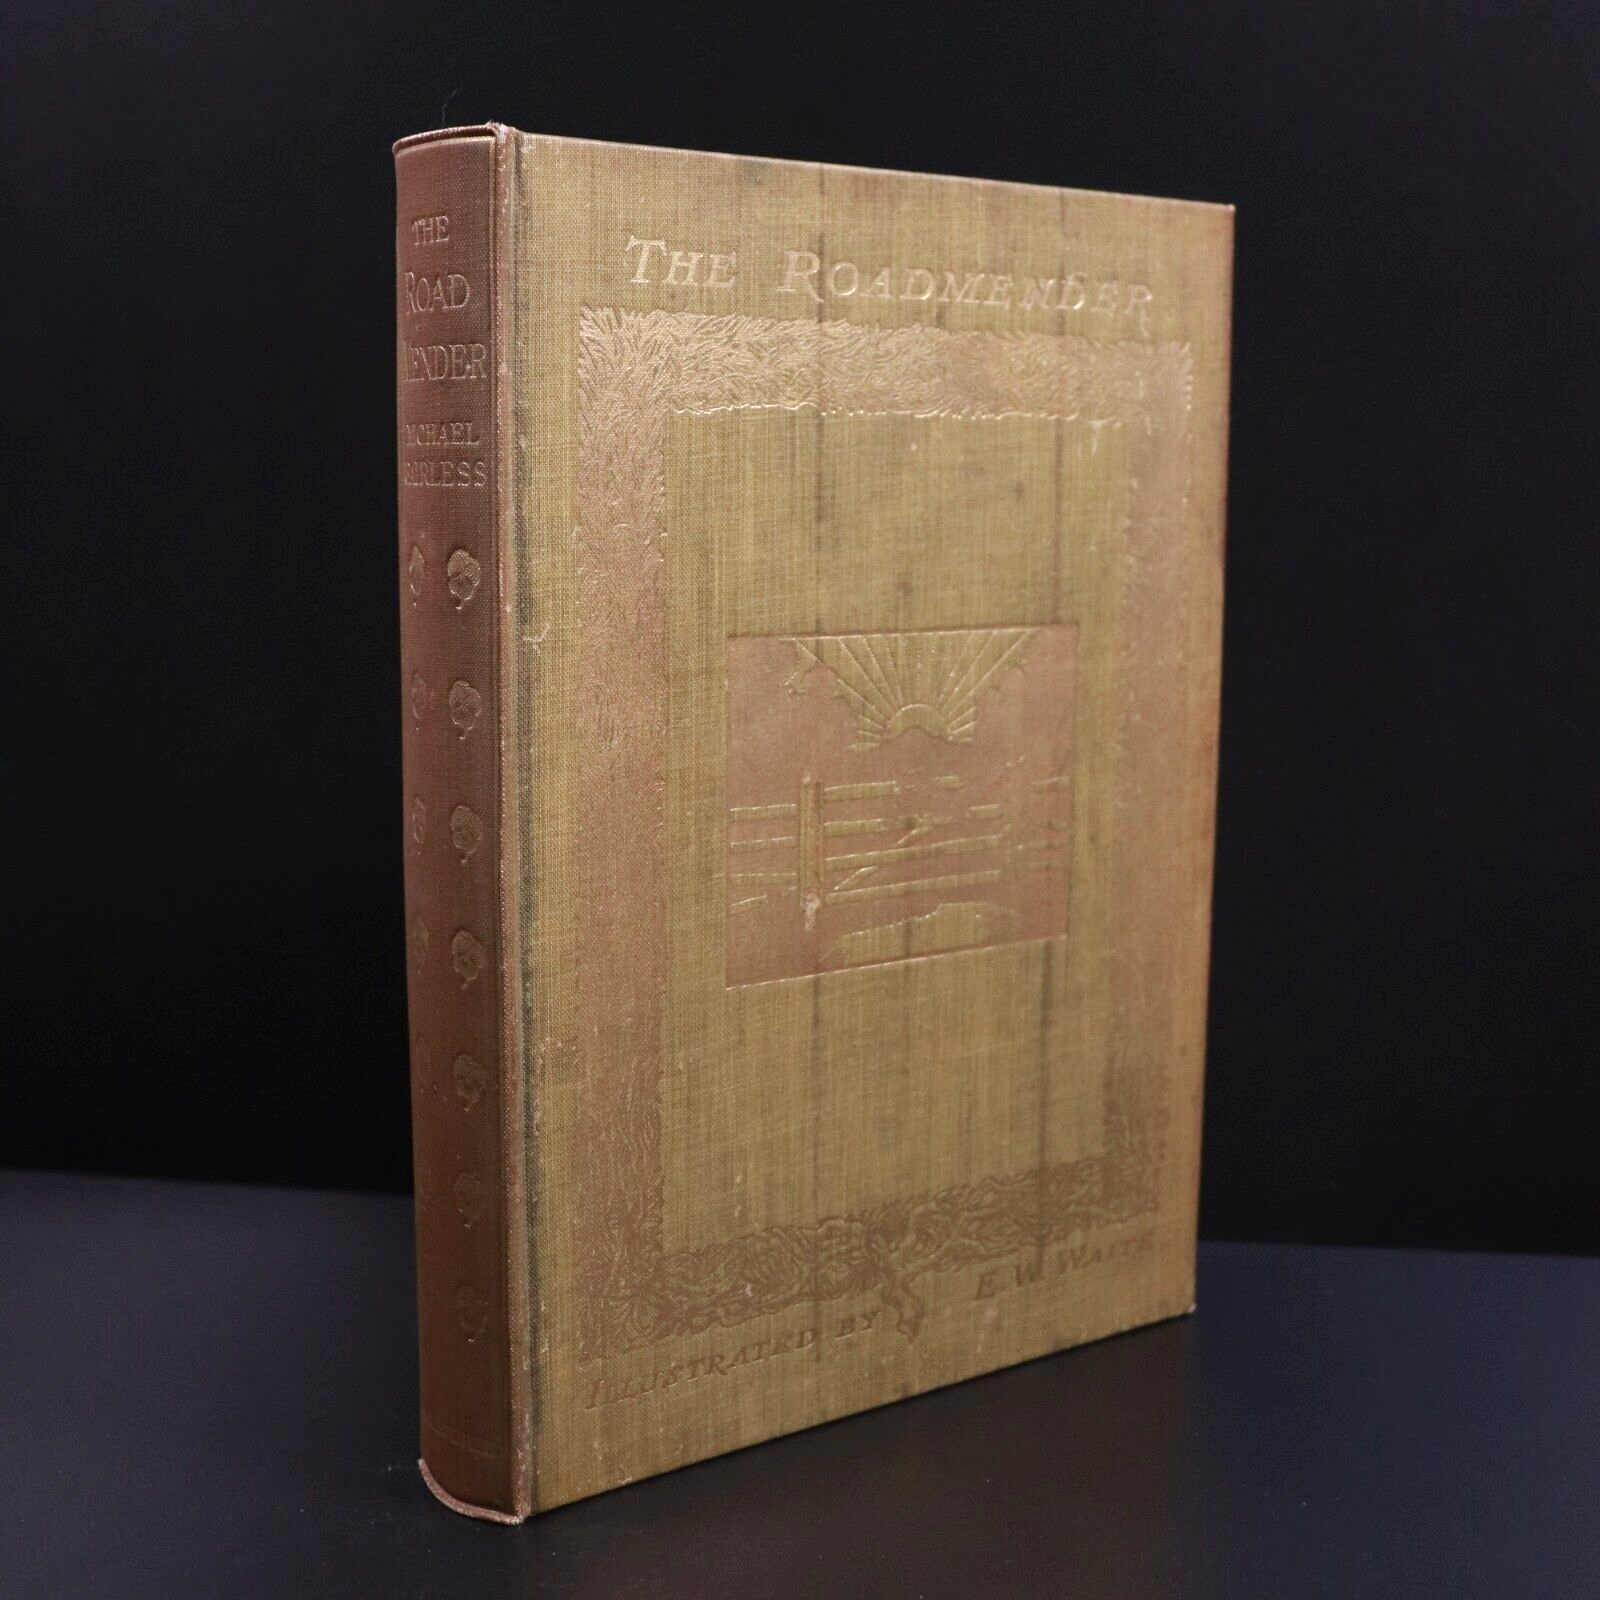 1911 The Roadmender by Michael Fairless Antique British Fiction Book